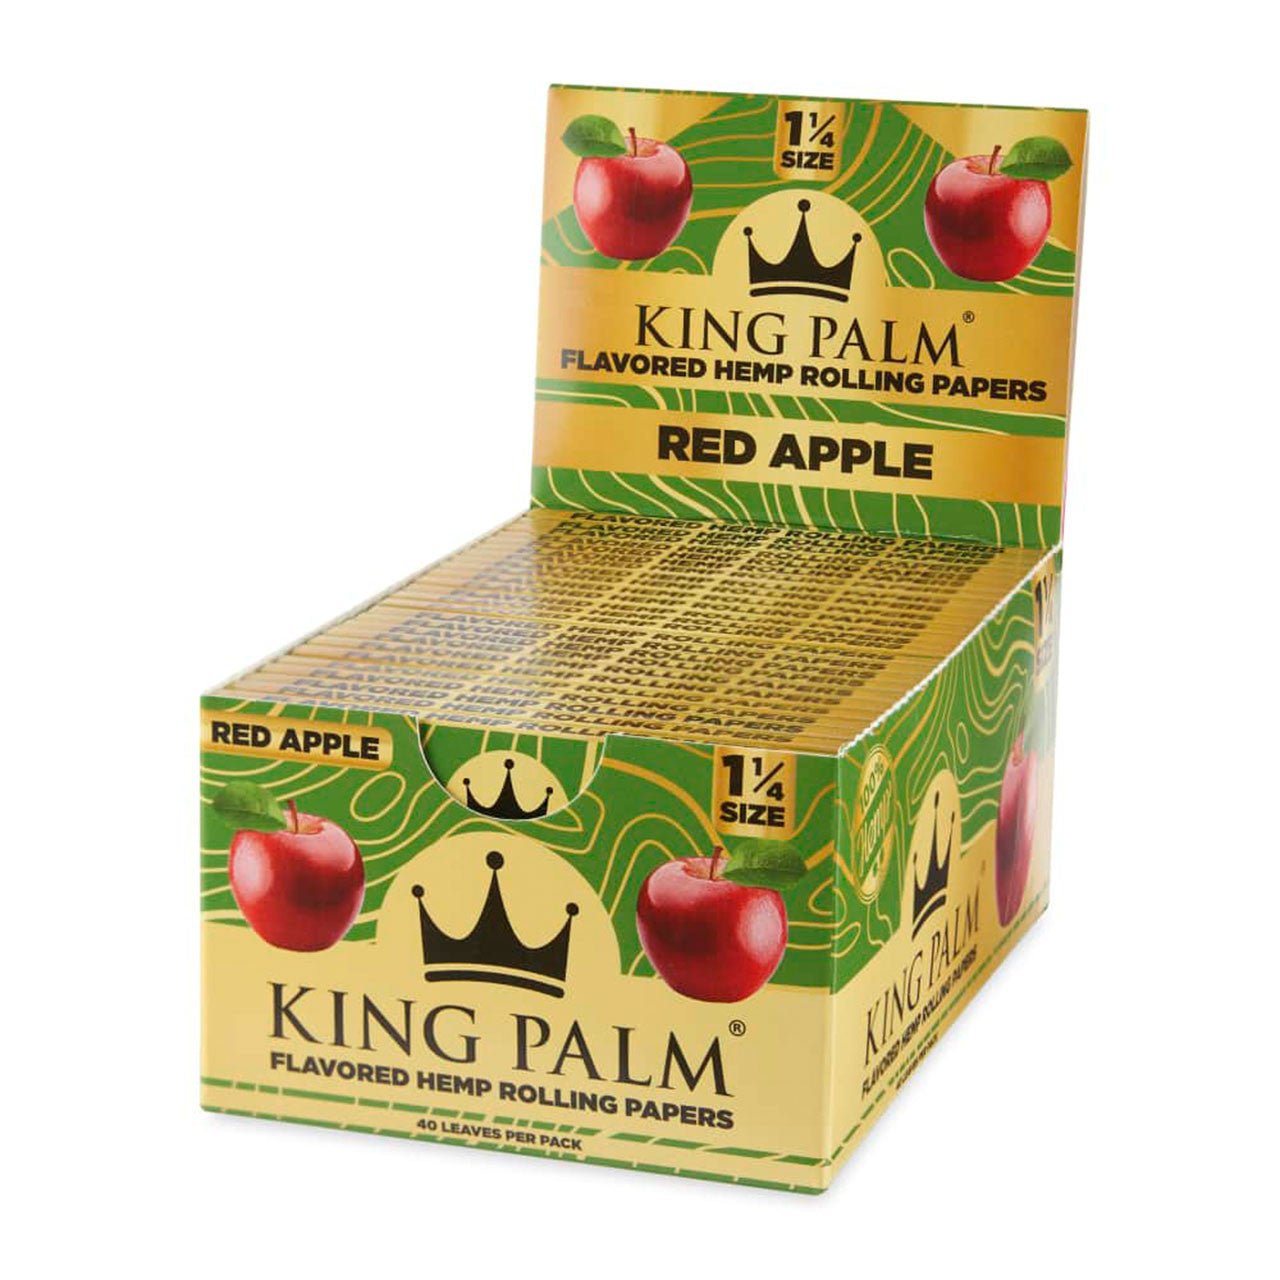 King Palm Red Apple Flavored Hemp Rolling Papers Box